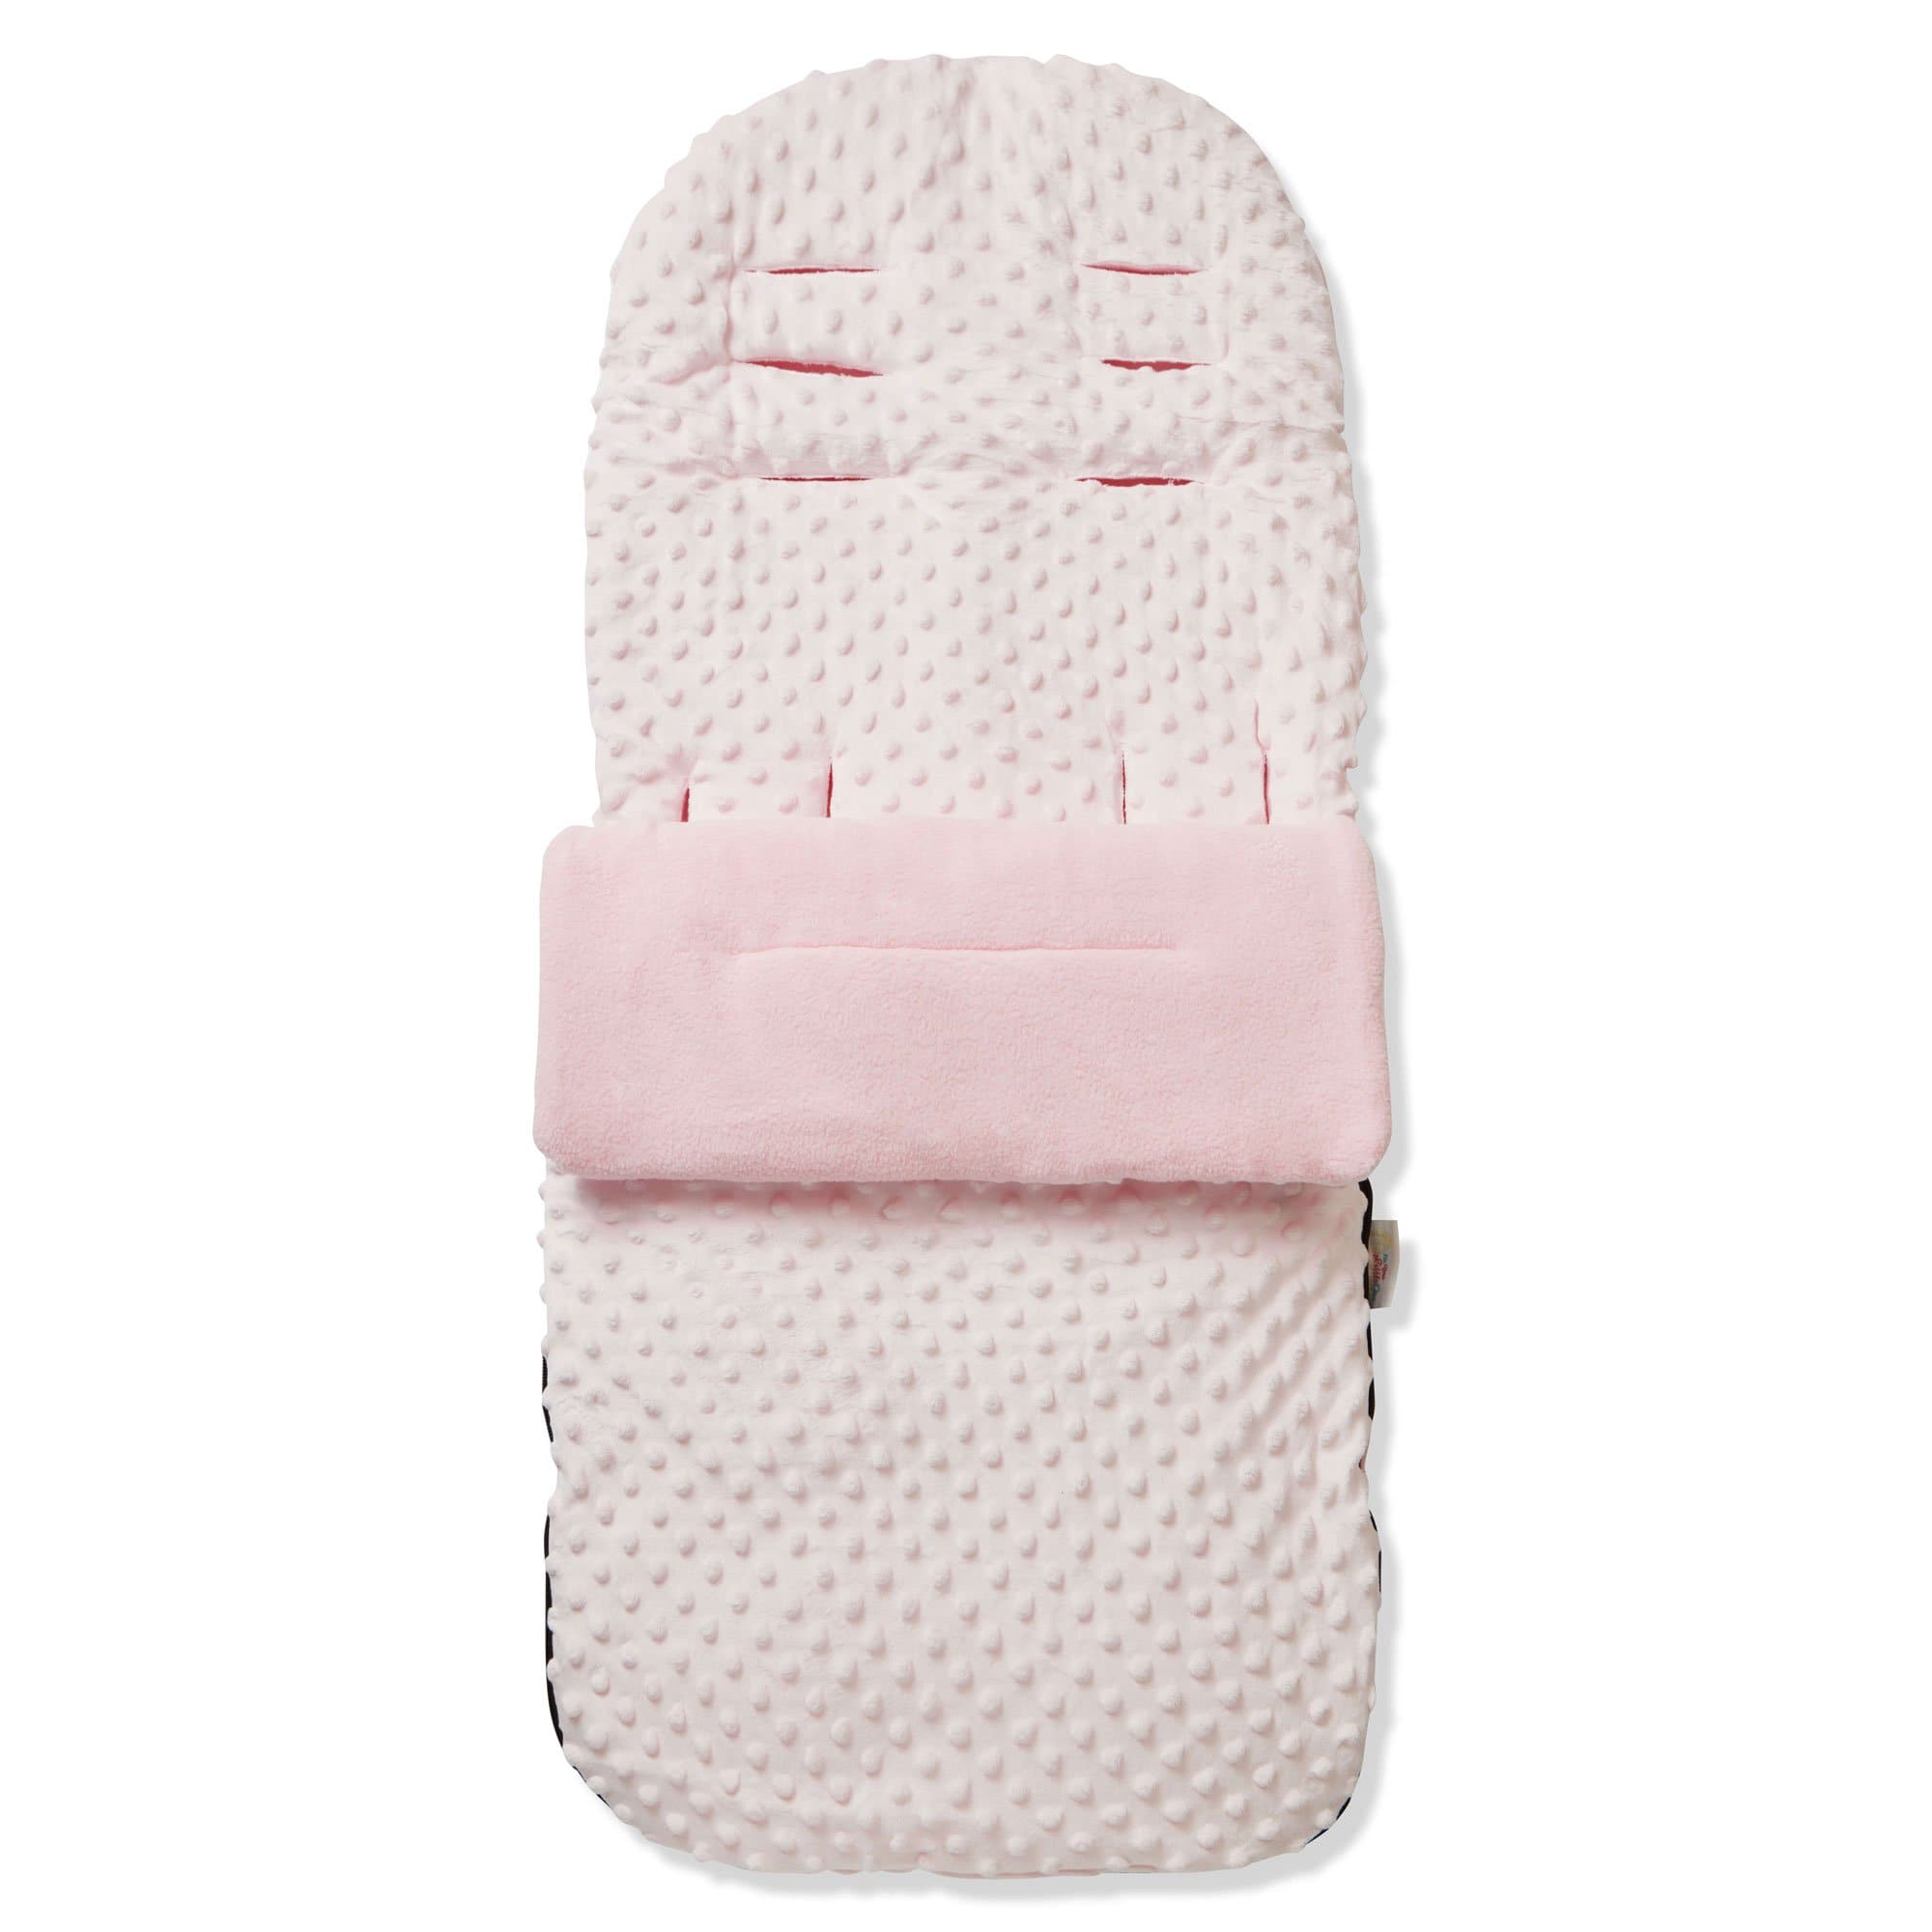 Dimple Footmuff / Cosy Toes Compatible with Mutsy - For Your Little One